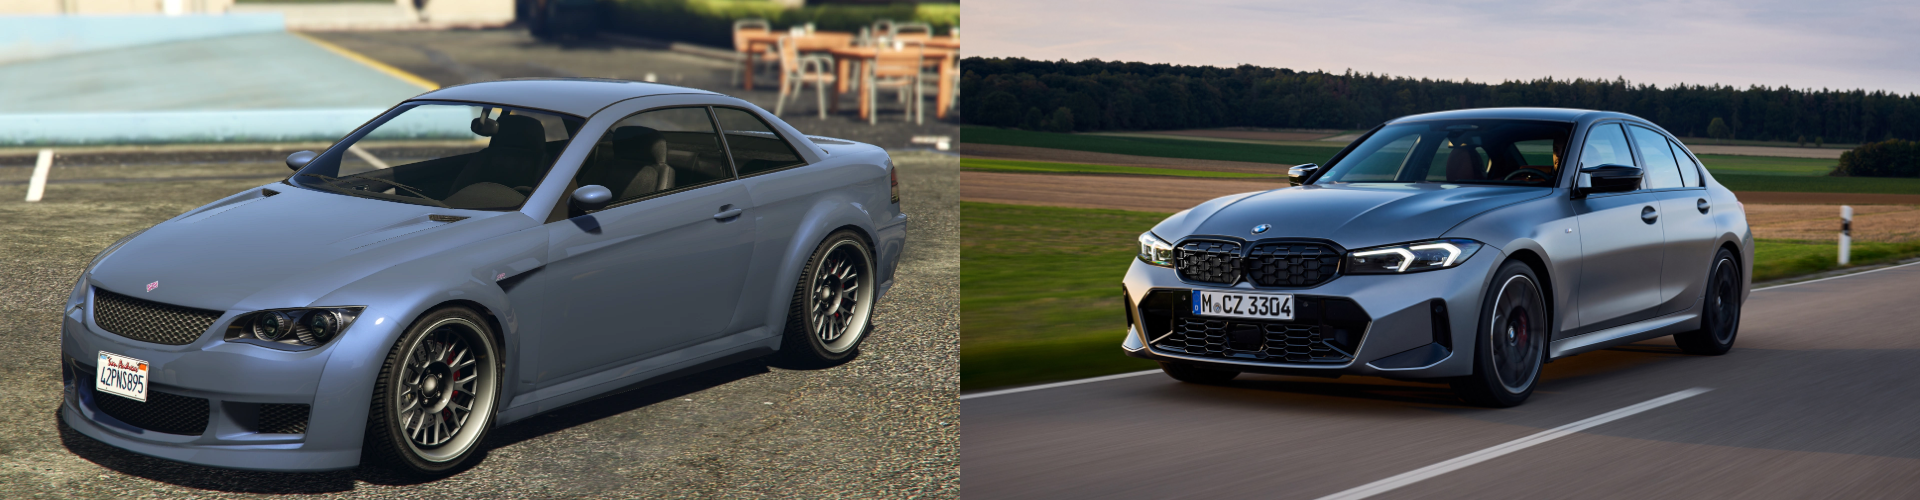 A side by side view of a virtual and real BMW 3-Series.